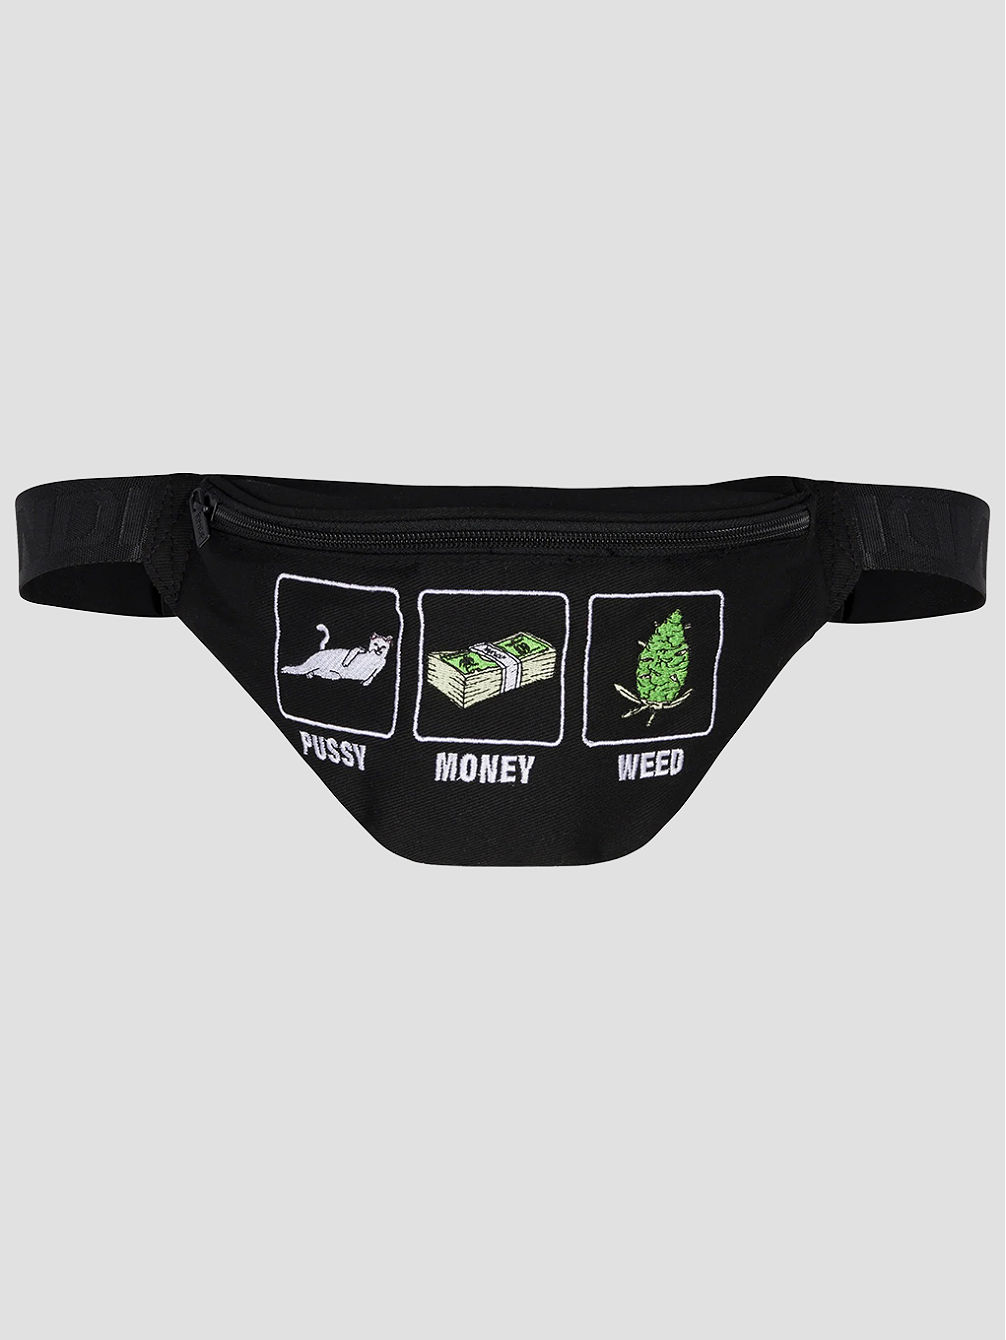 Pussy, Money, Weed Fanny Pack Saco